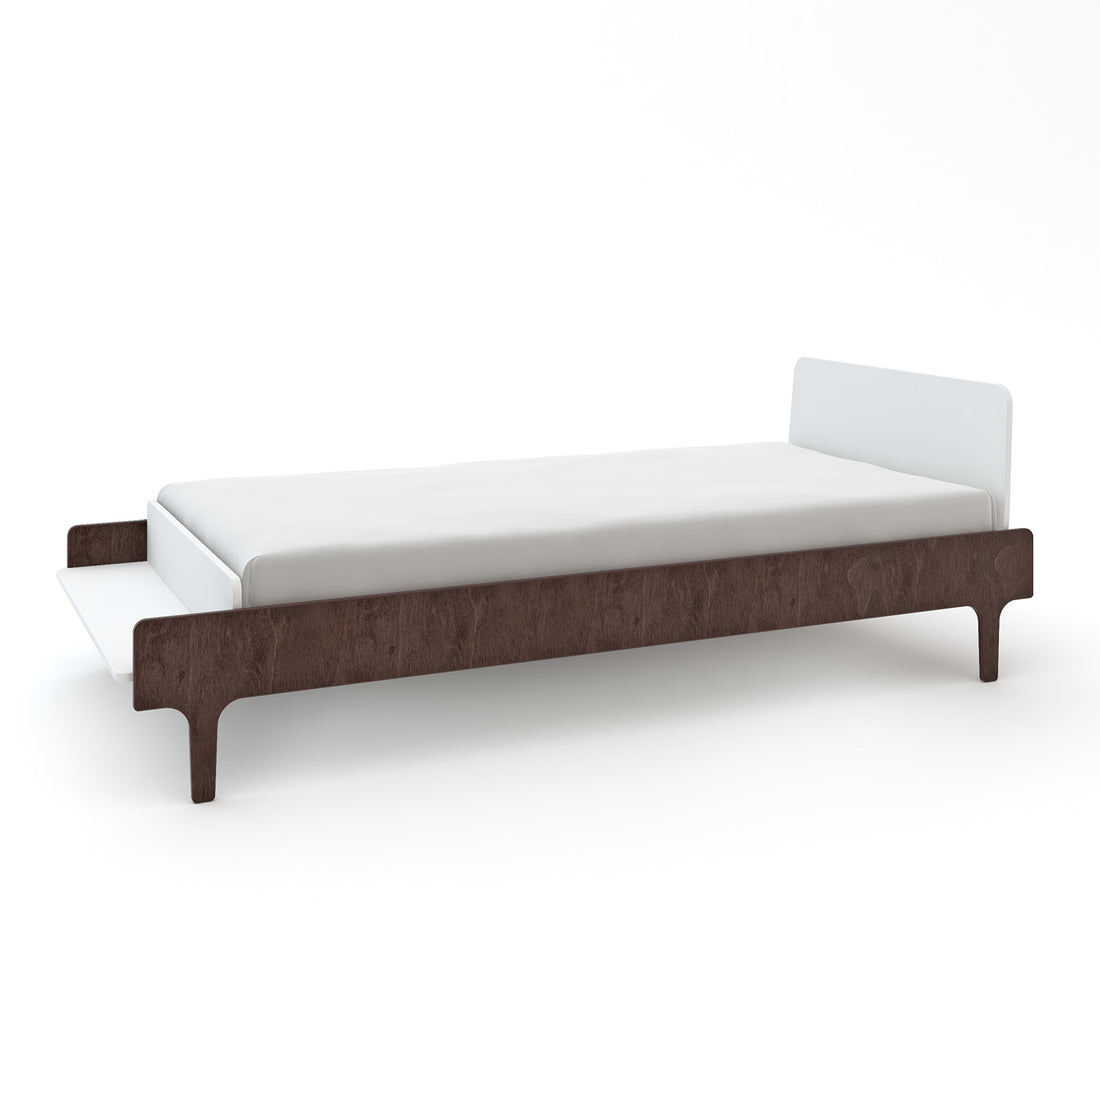 Oeuf River Twin Bed Walnut